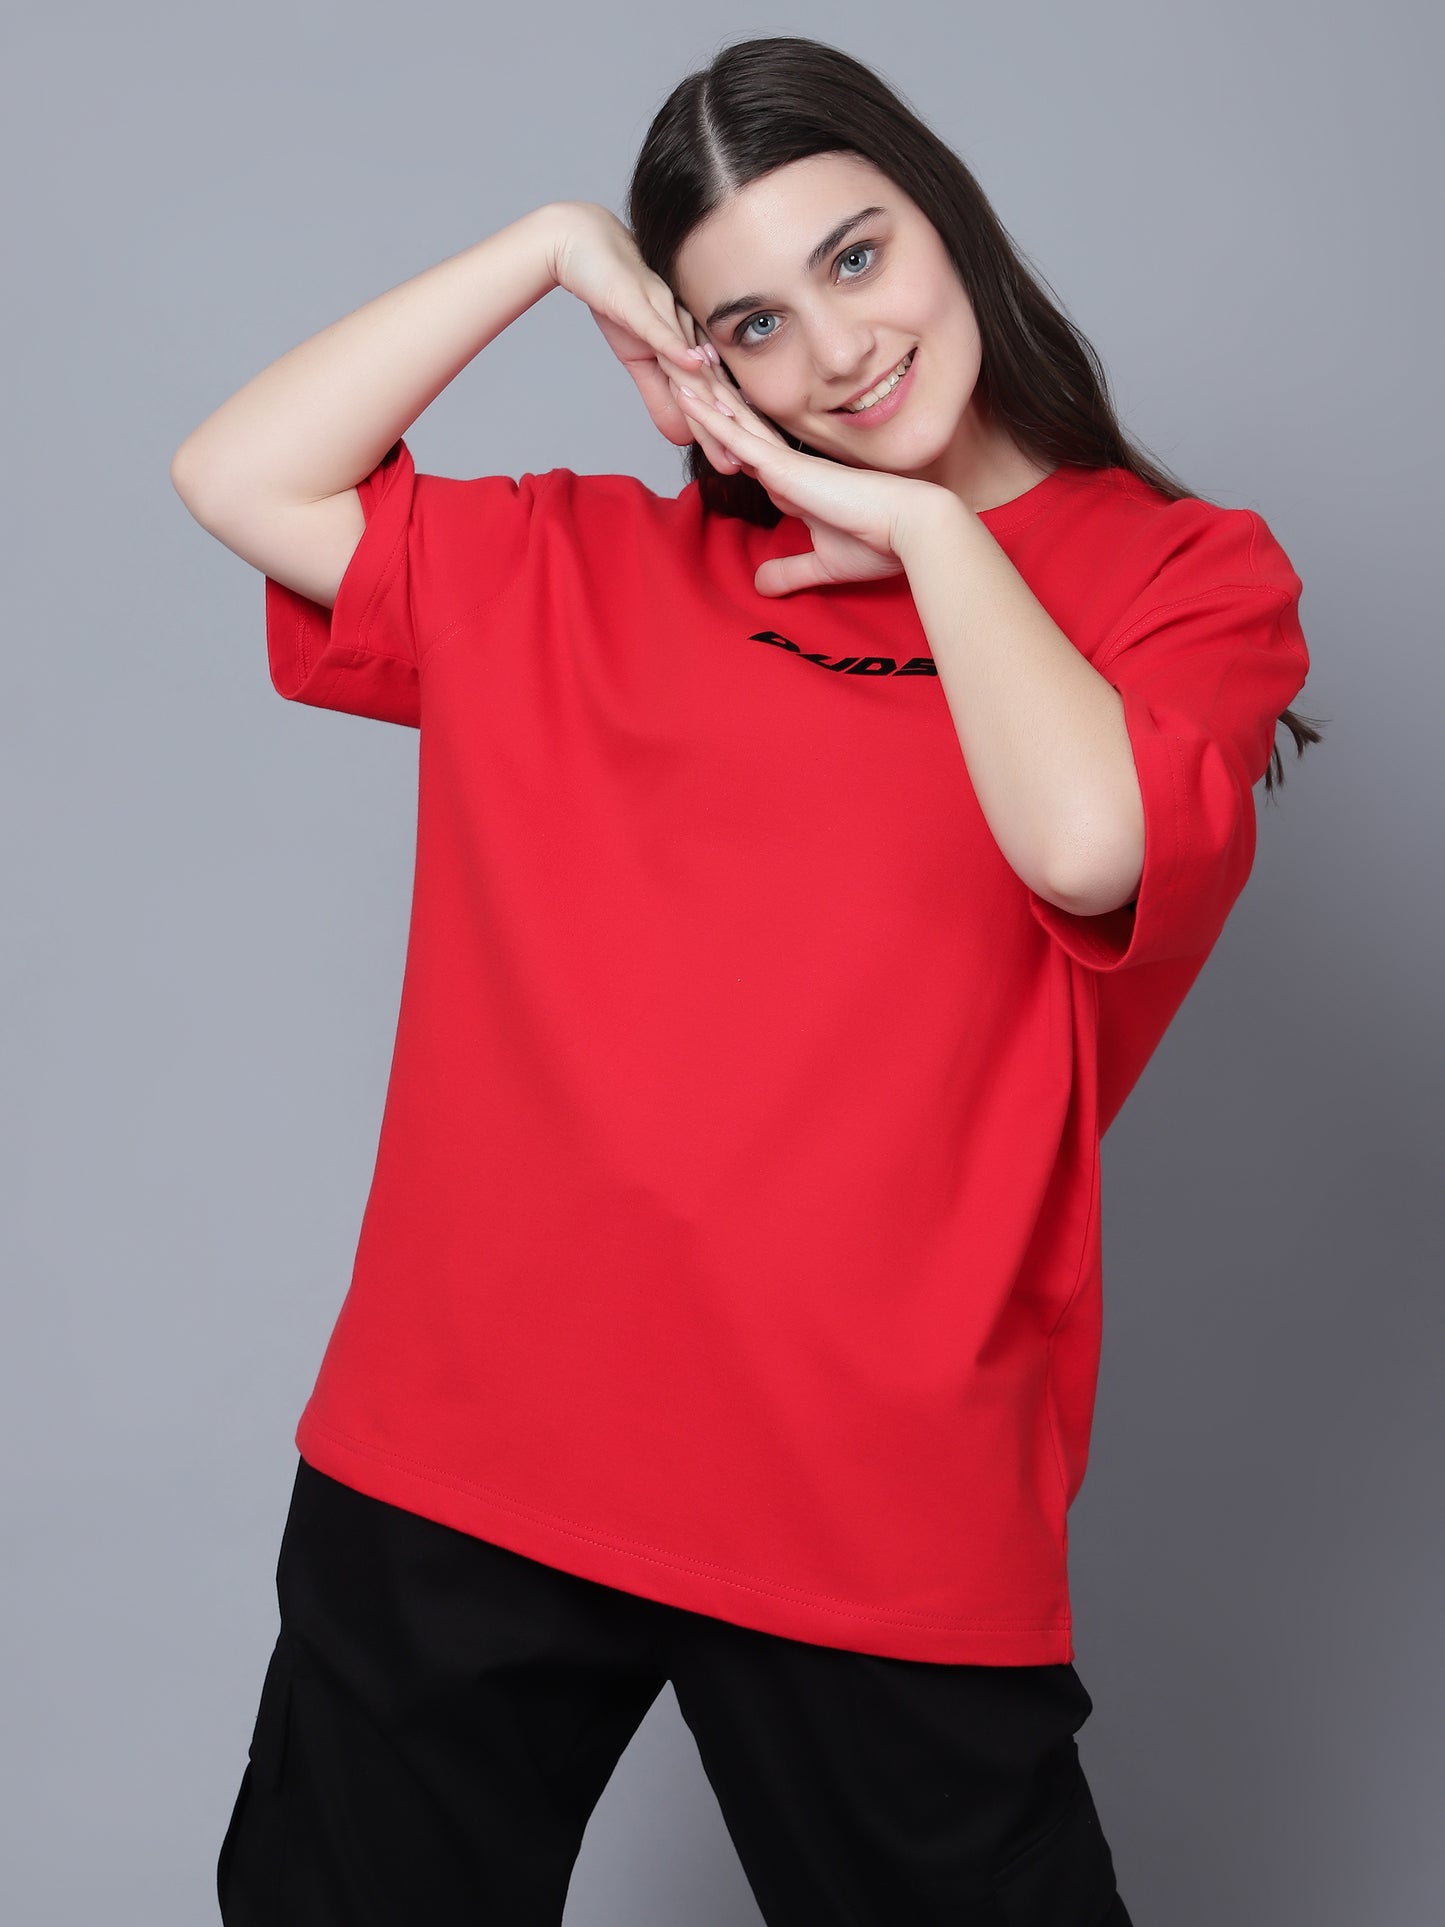 Workout Over-Sized T-Shirt (Red) - Wearduds